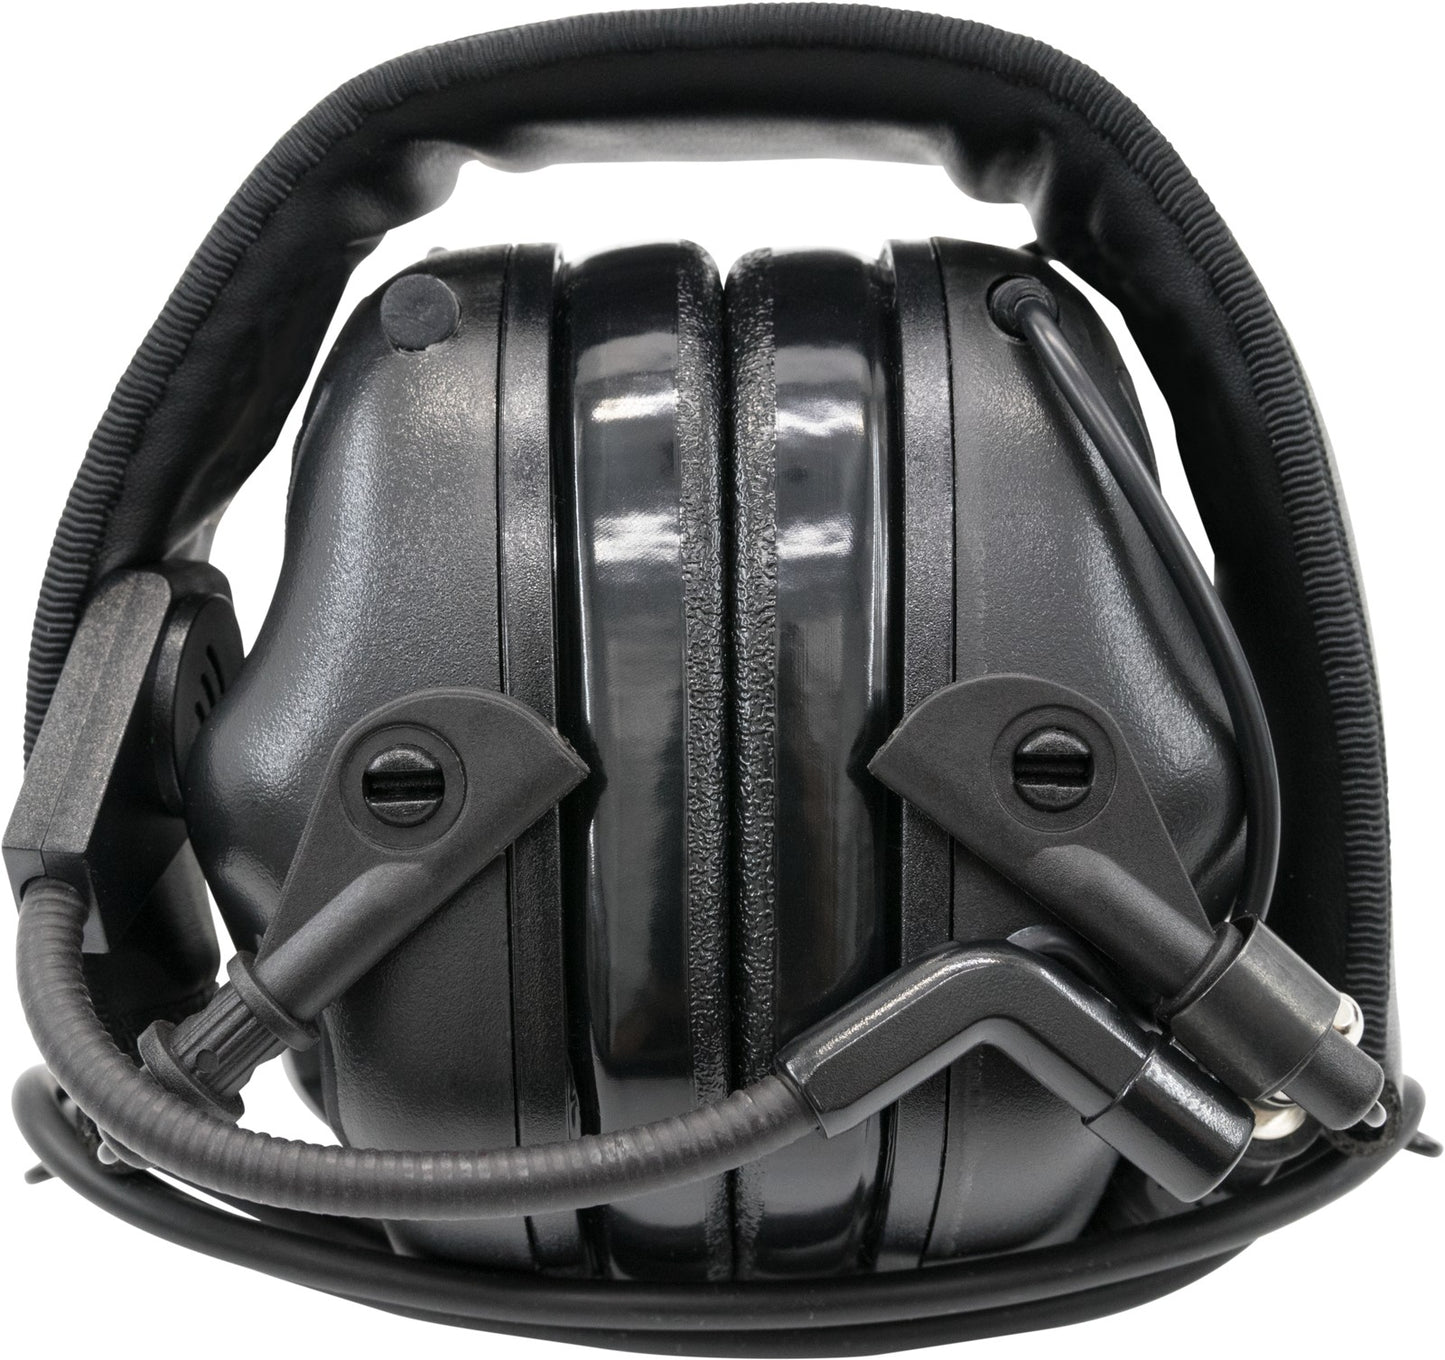 Electronic Shooting Noise Cancelling Hunting Electric Ear Muffs Shooting Protection Fm Earmuff with Communication Line